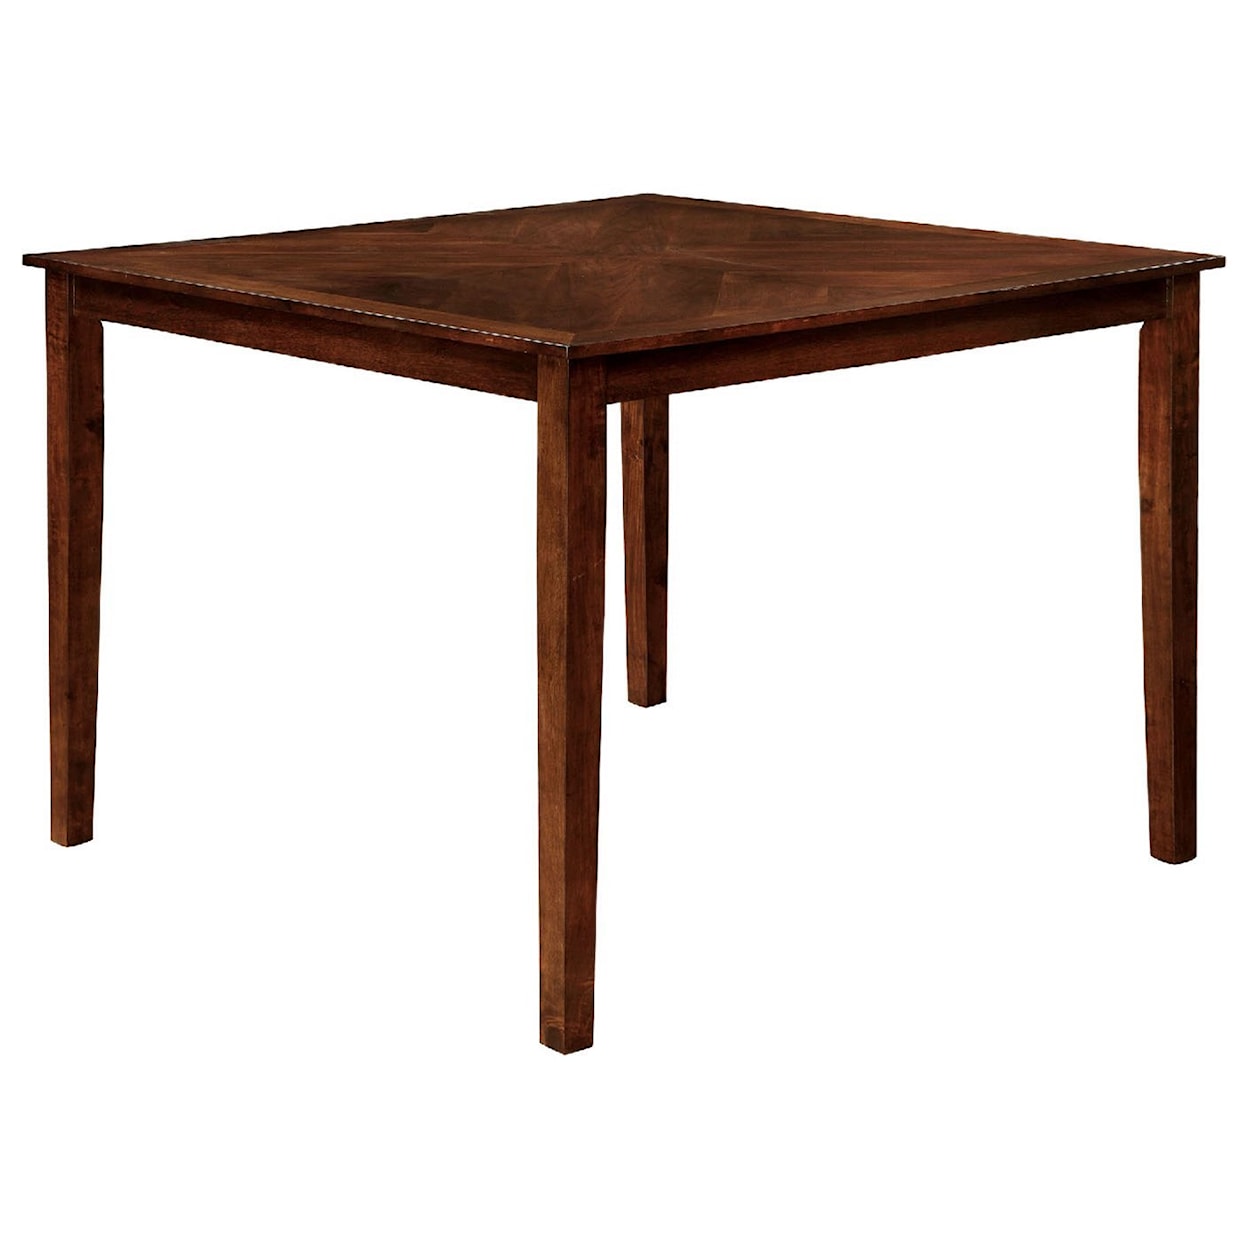 Furniture of America Hillsview Counter Height Table Set